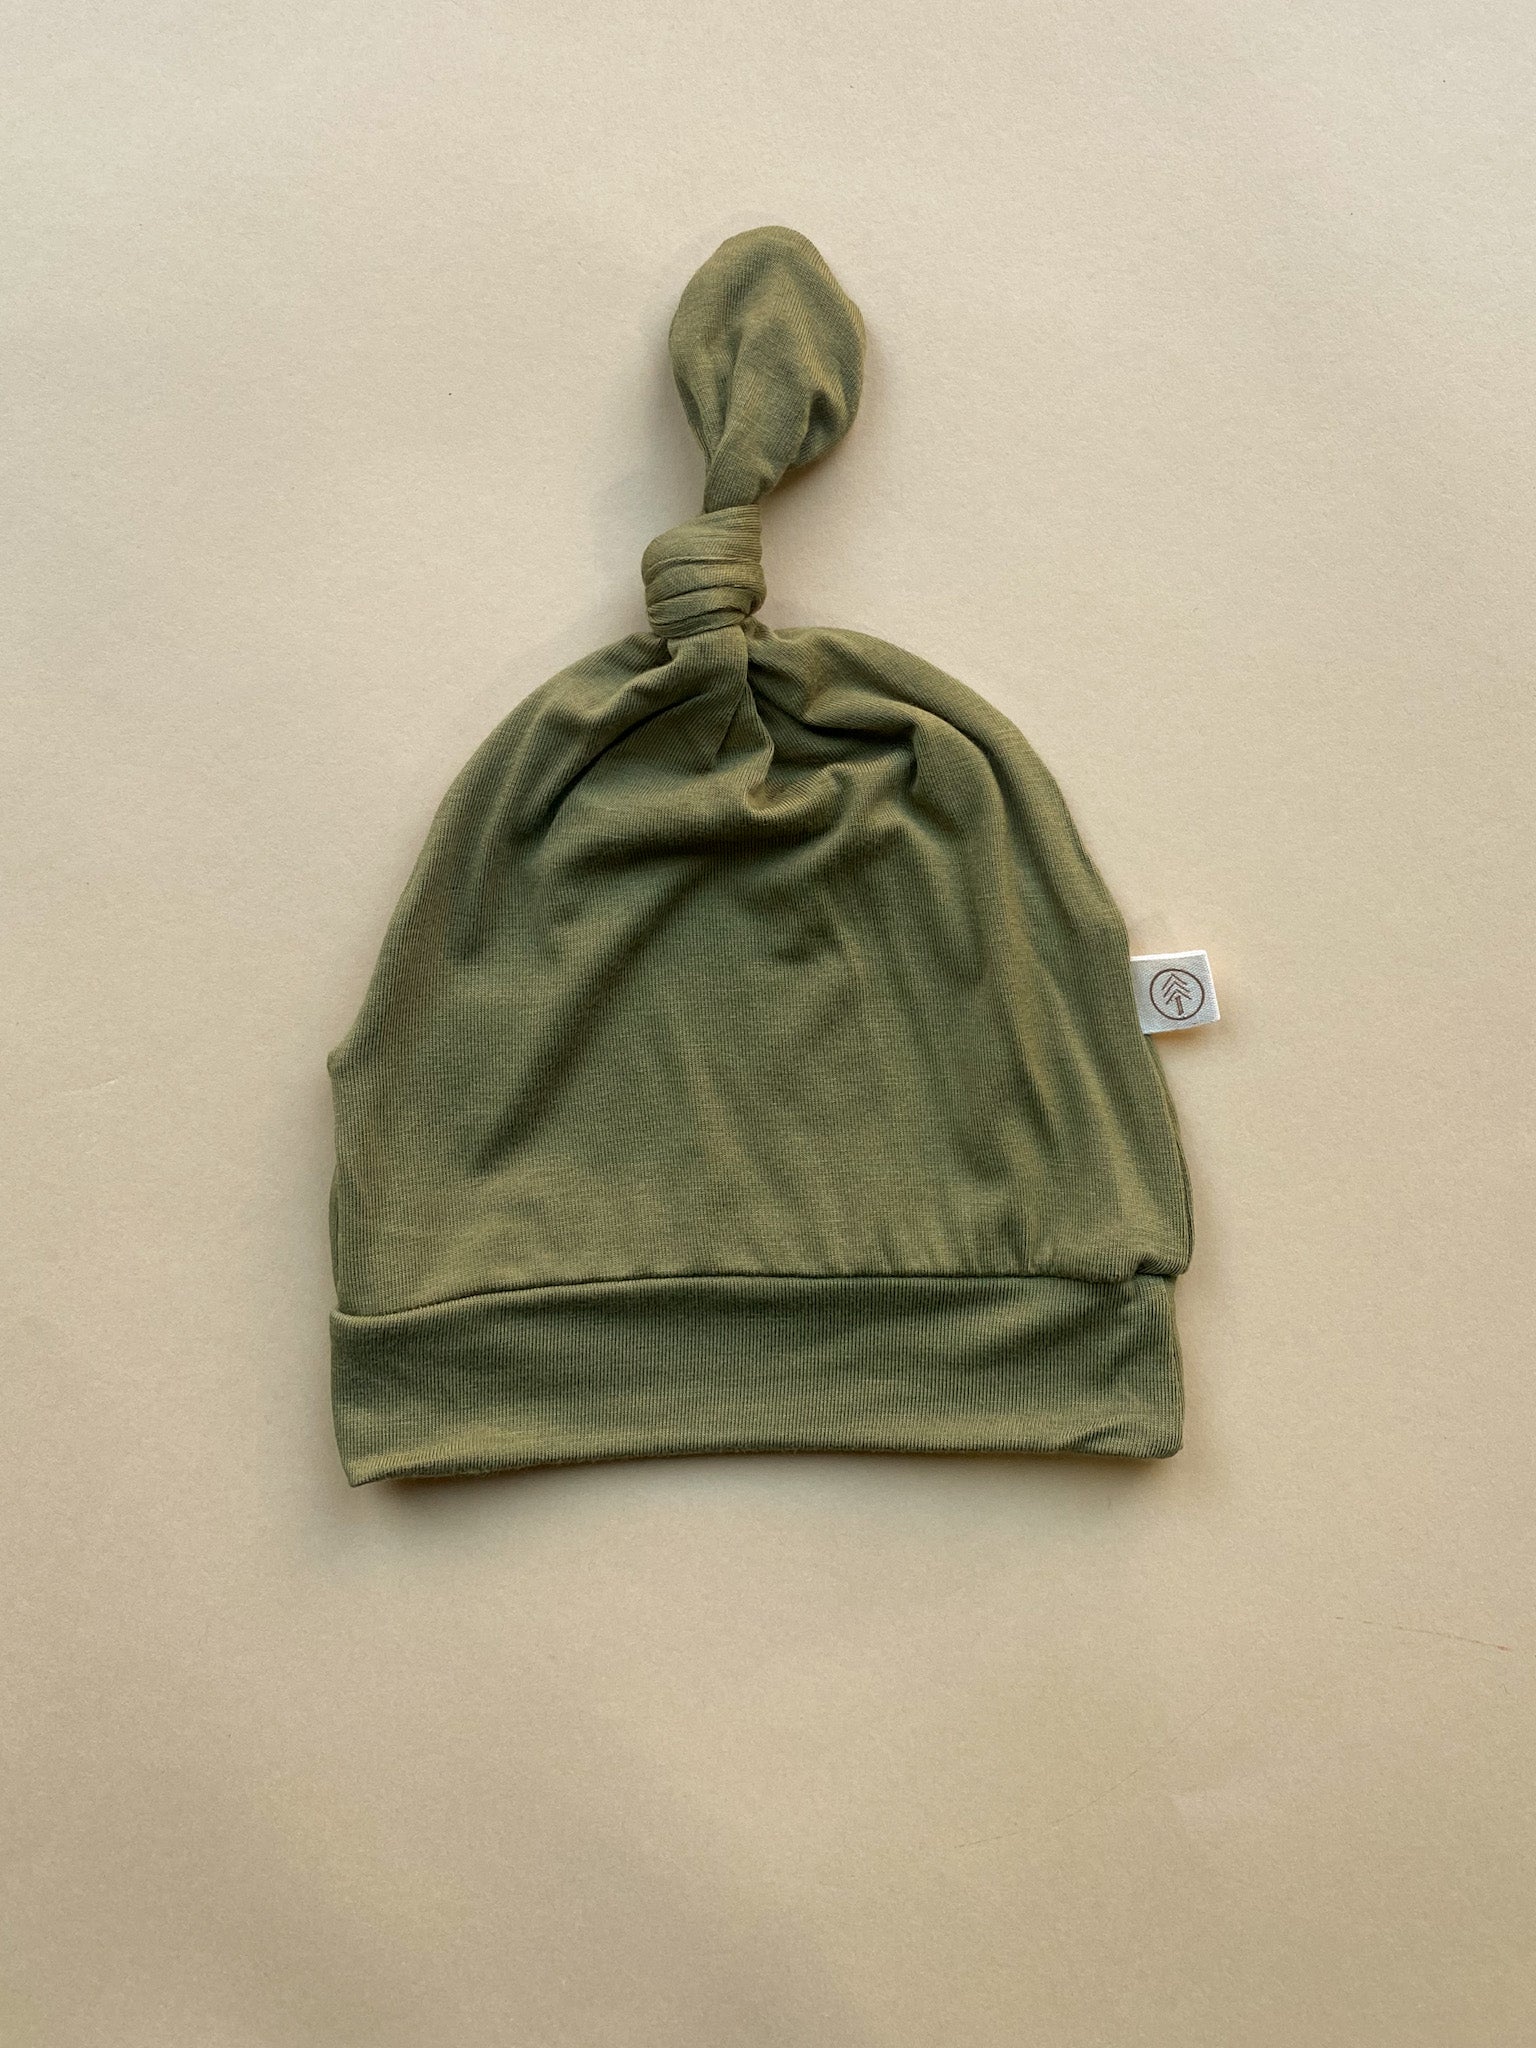 Bamboo Baby Top Knot Hat - Moss